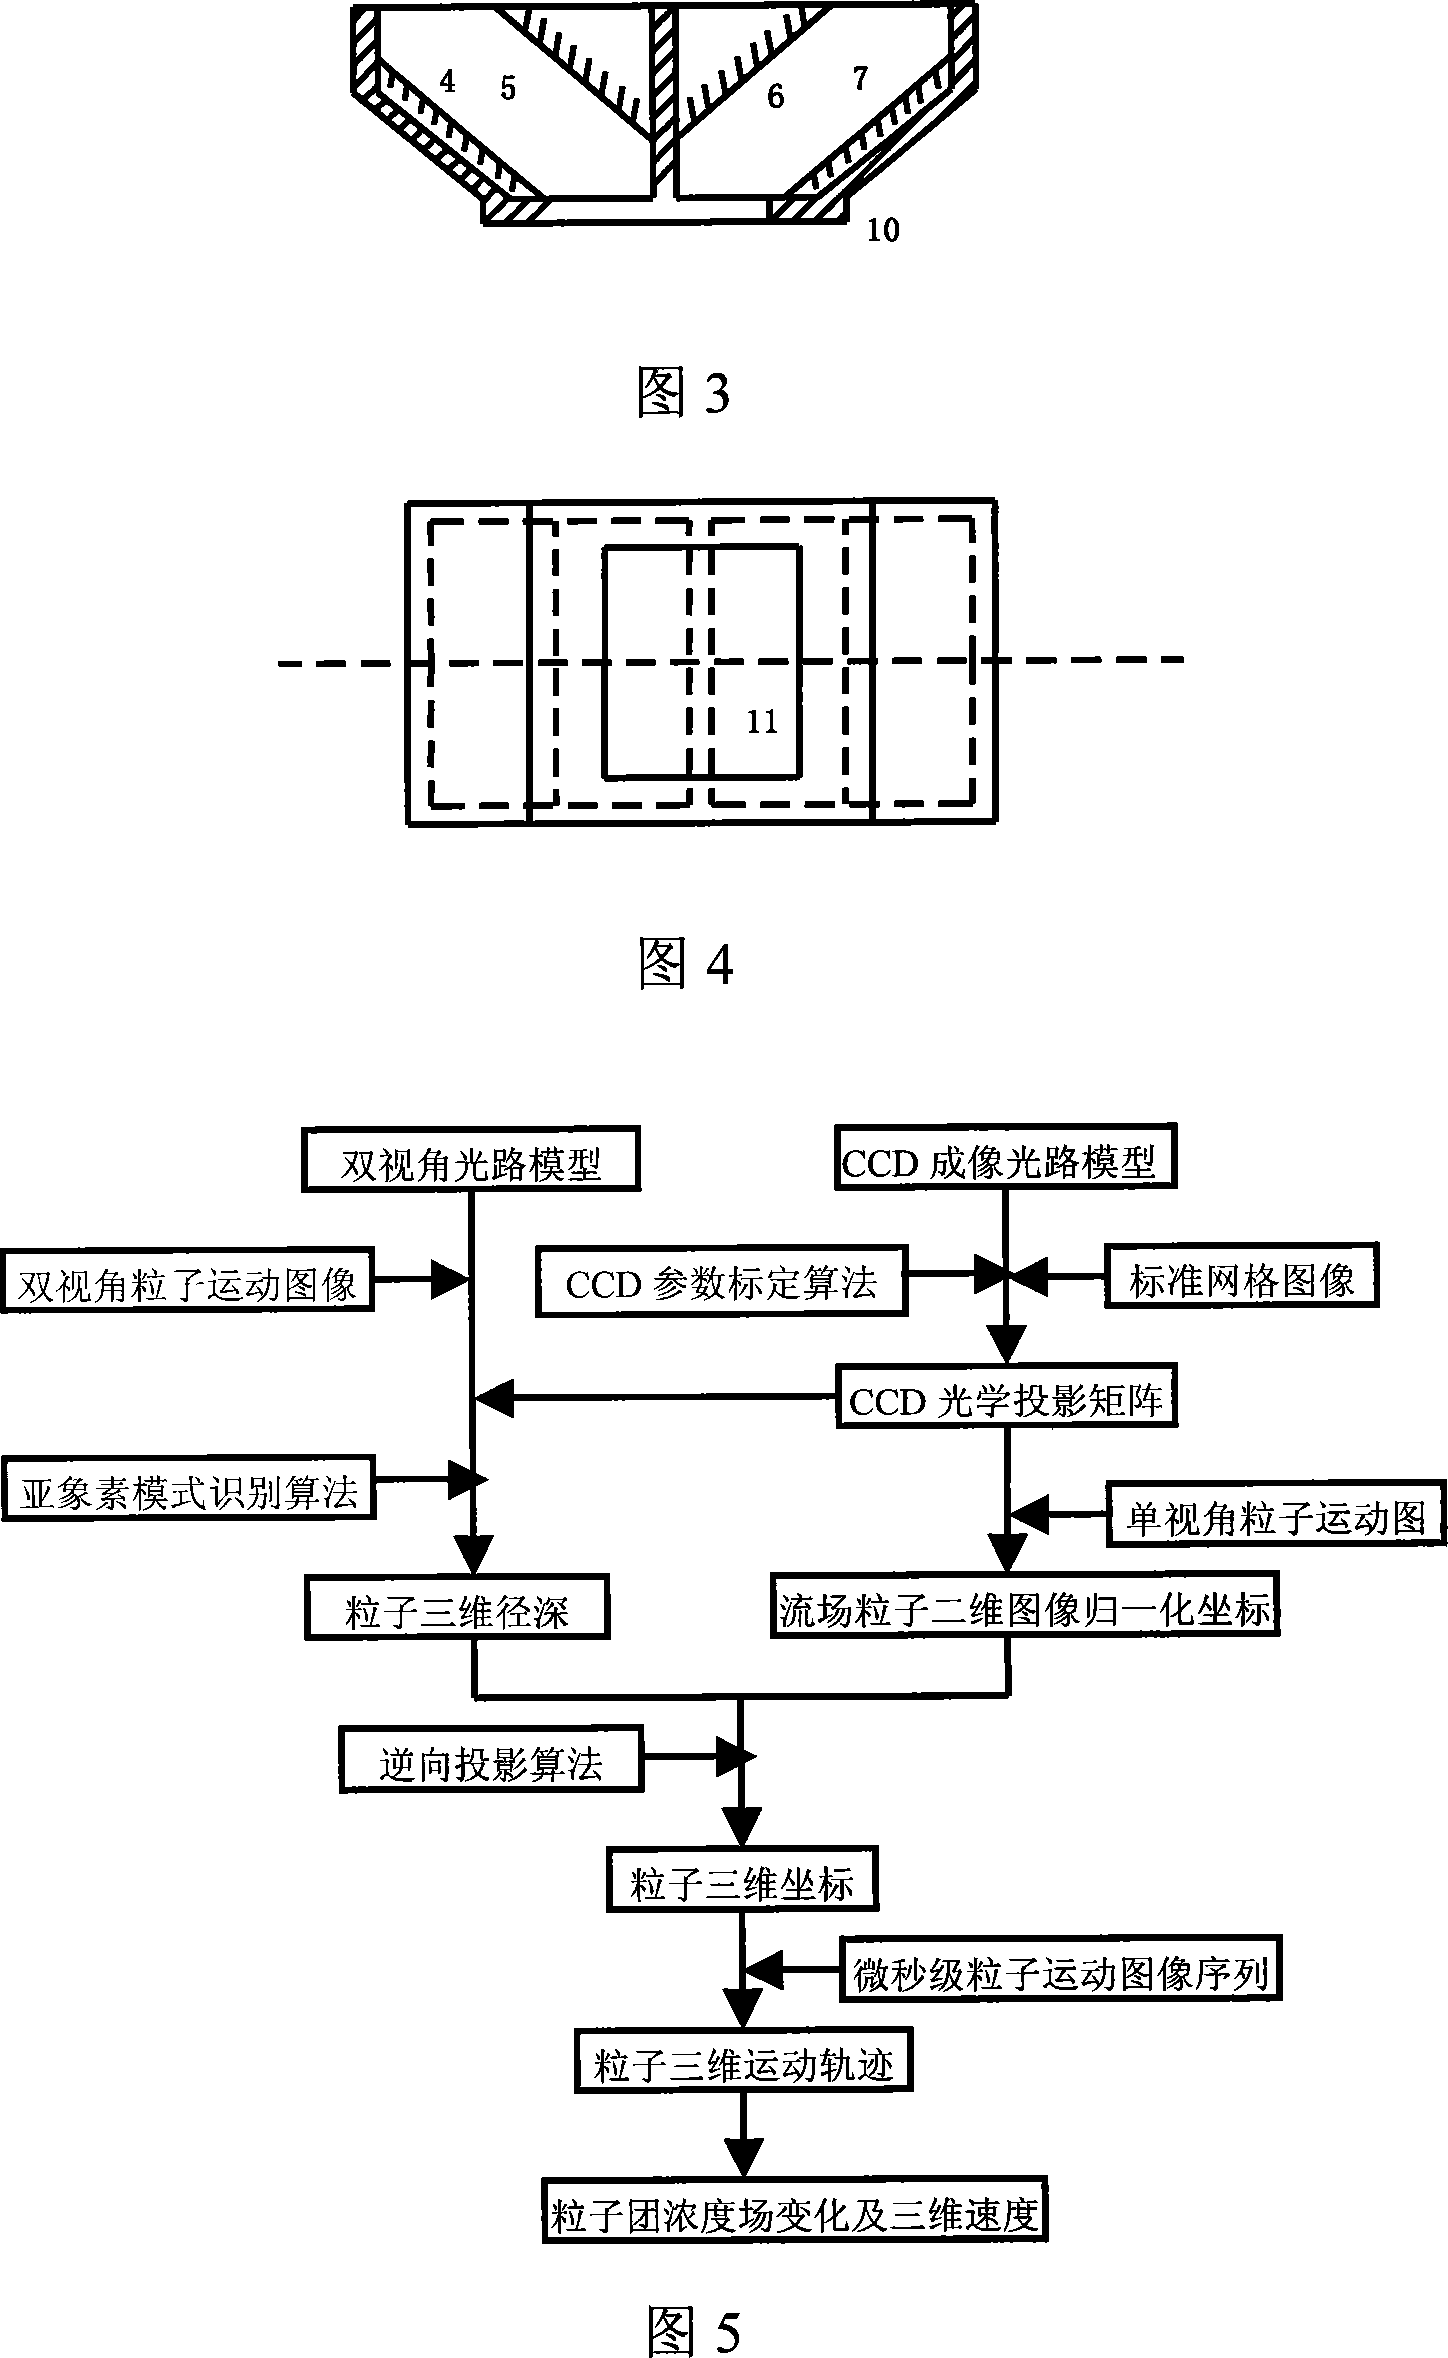 Method for measuring solid particle three-dimensional concentration field and velocity field in gas/solid two-phase stream